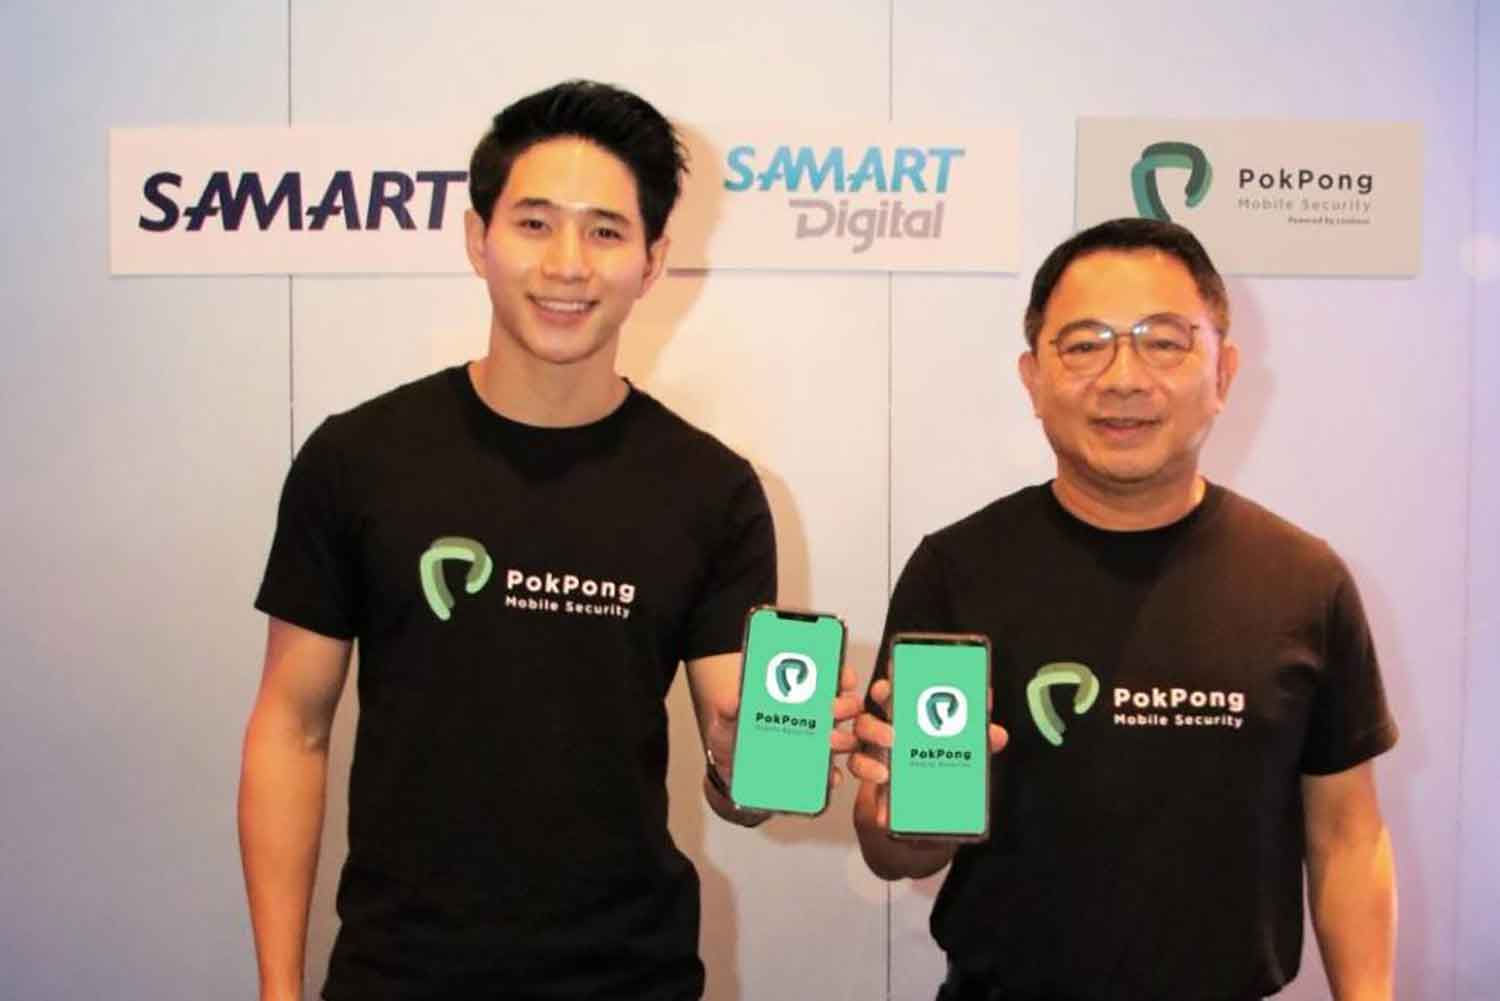 Mr Watchai, right, and Mr Ruttanun at the launch of mobile security app PokPong.